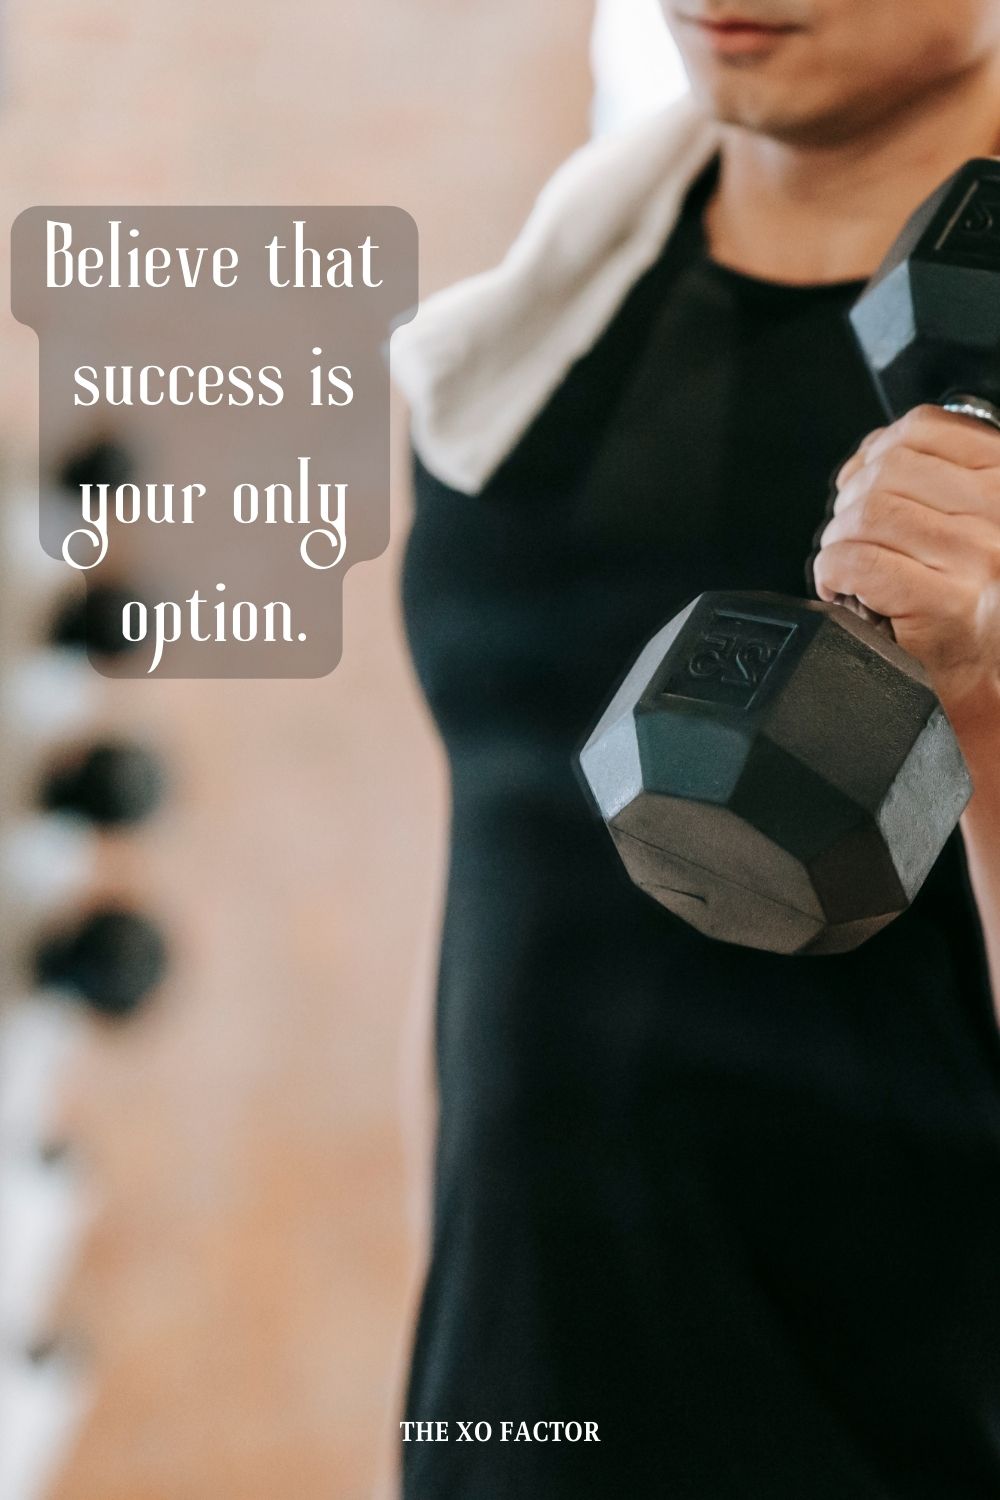 Believe that success is your only option.